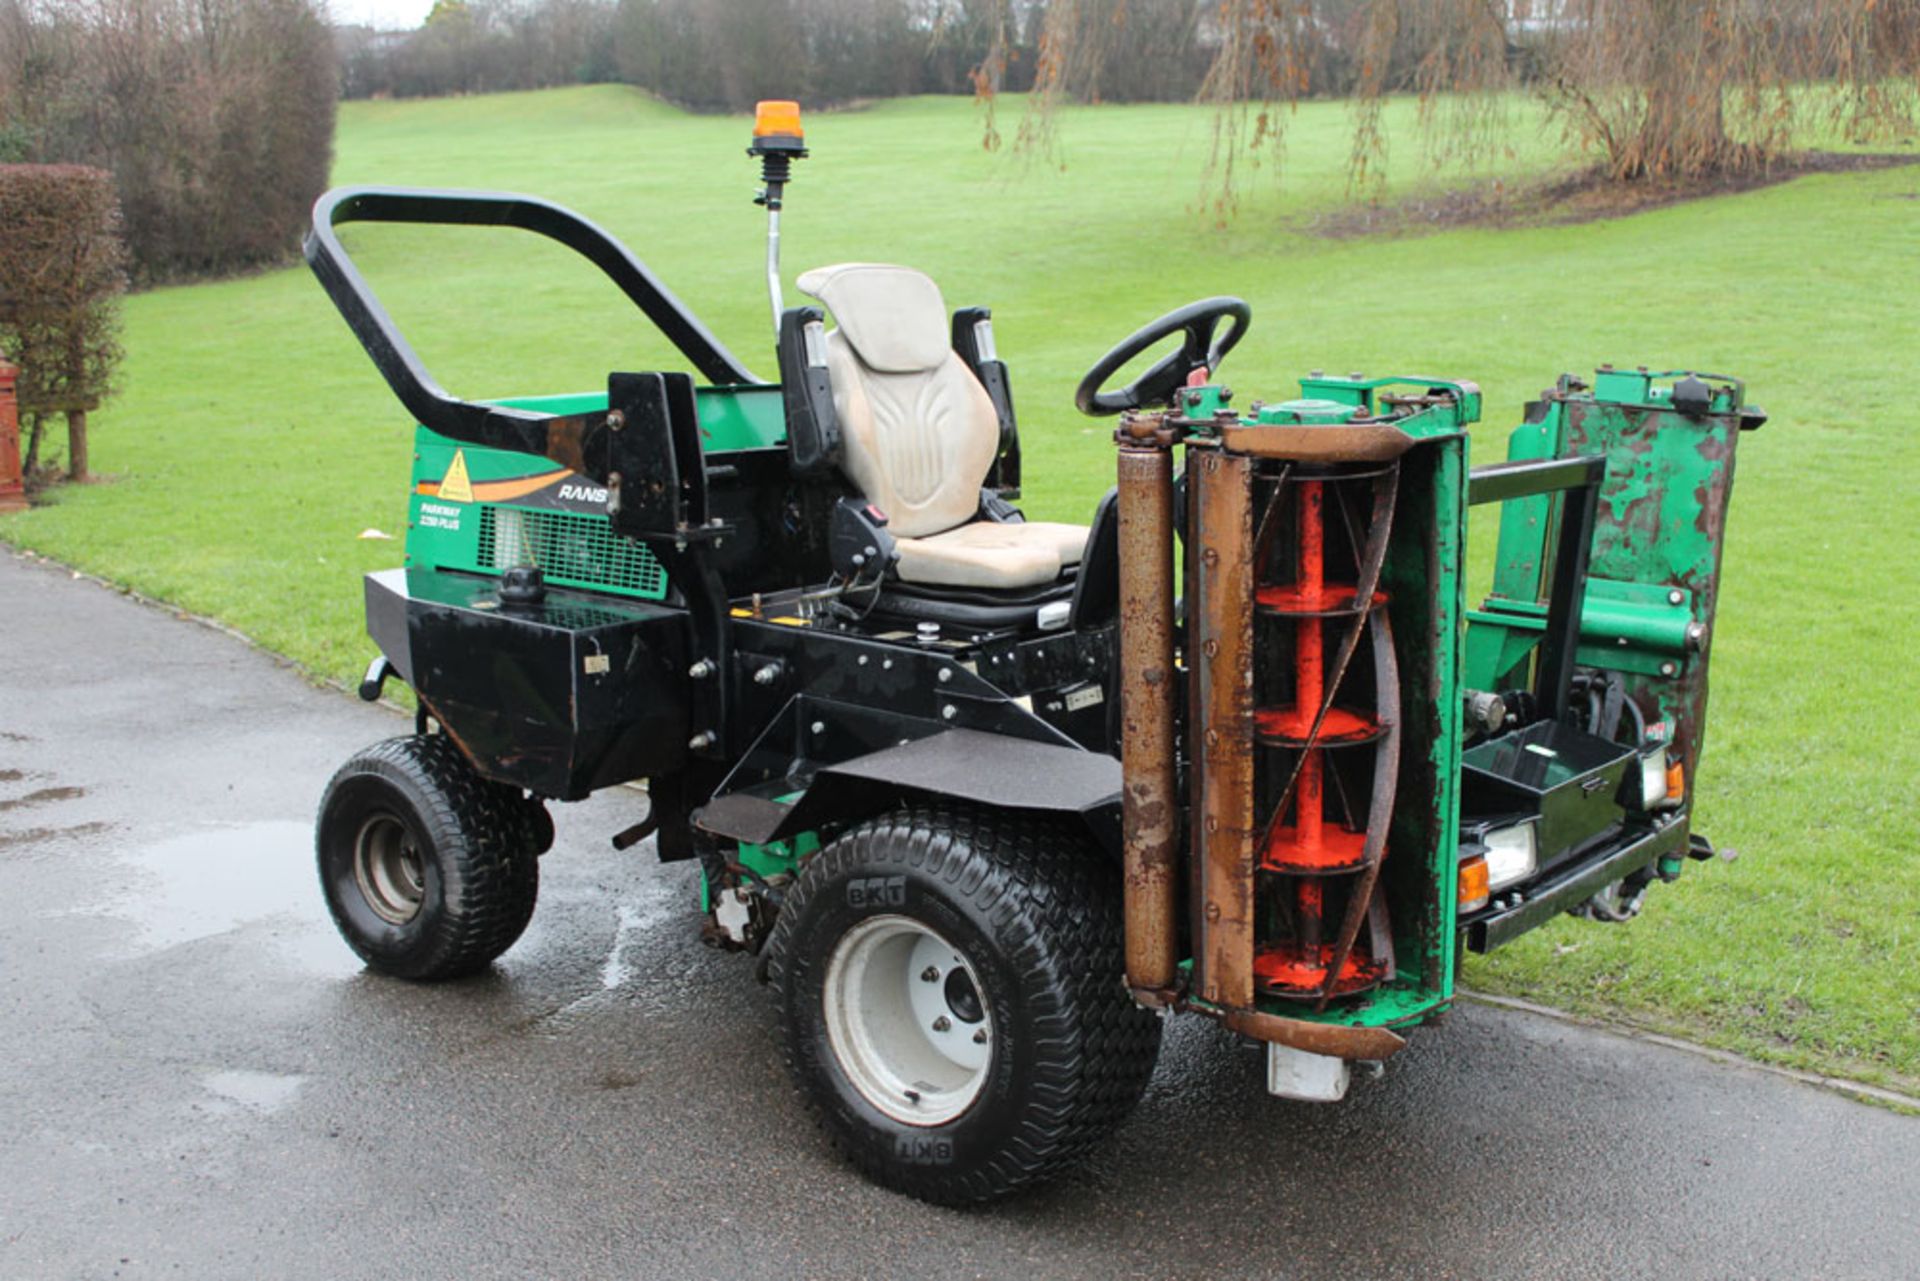 2010 Ransomes Parkway 2250 Plus Ride On Cylinder Mower